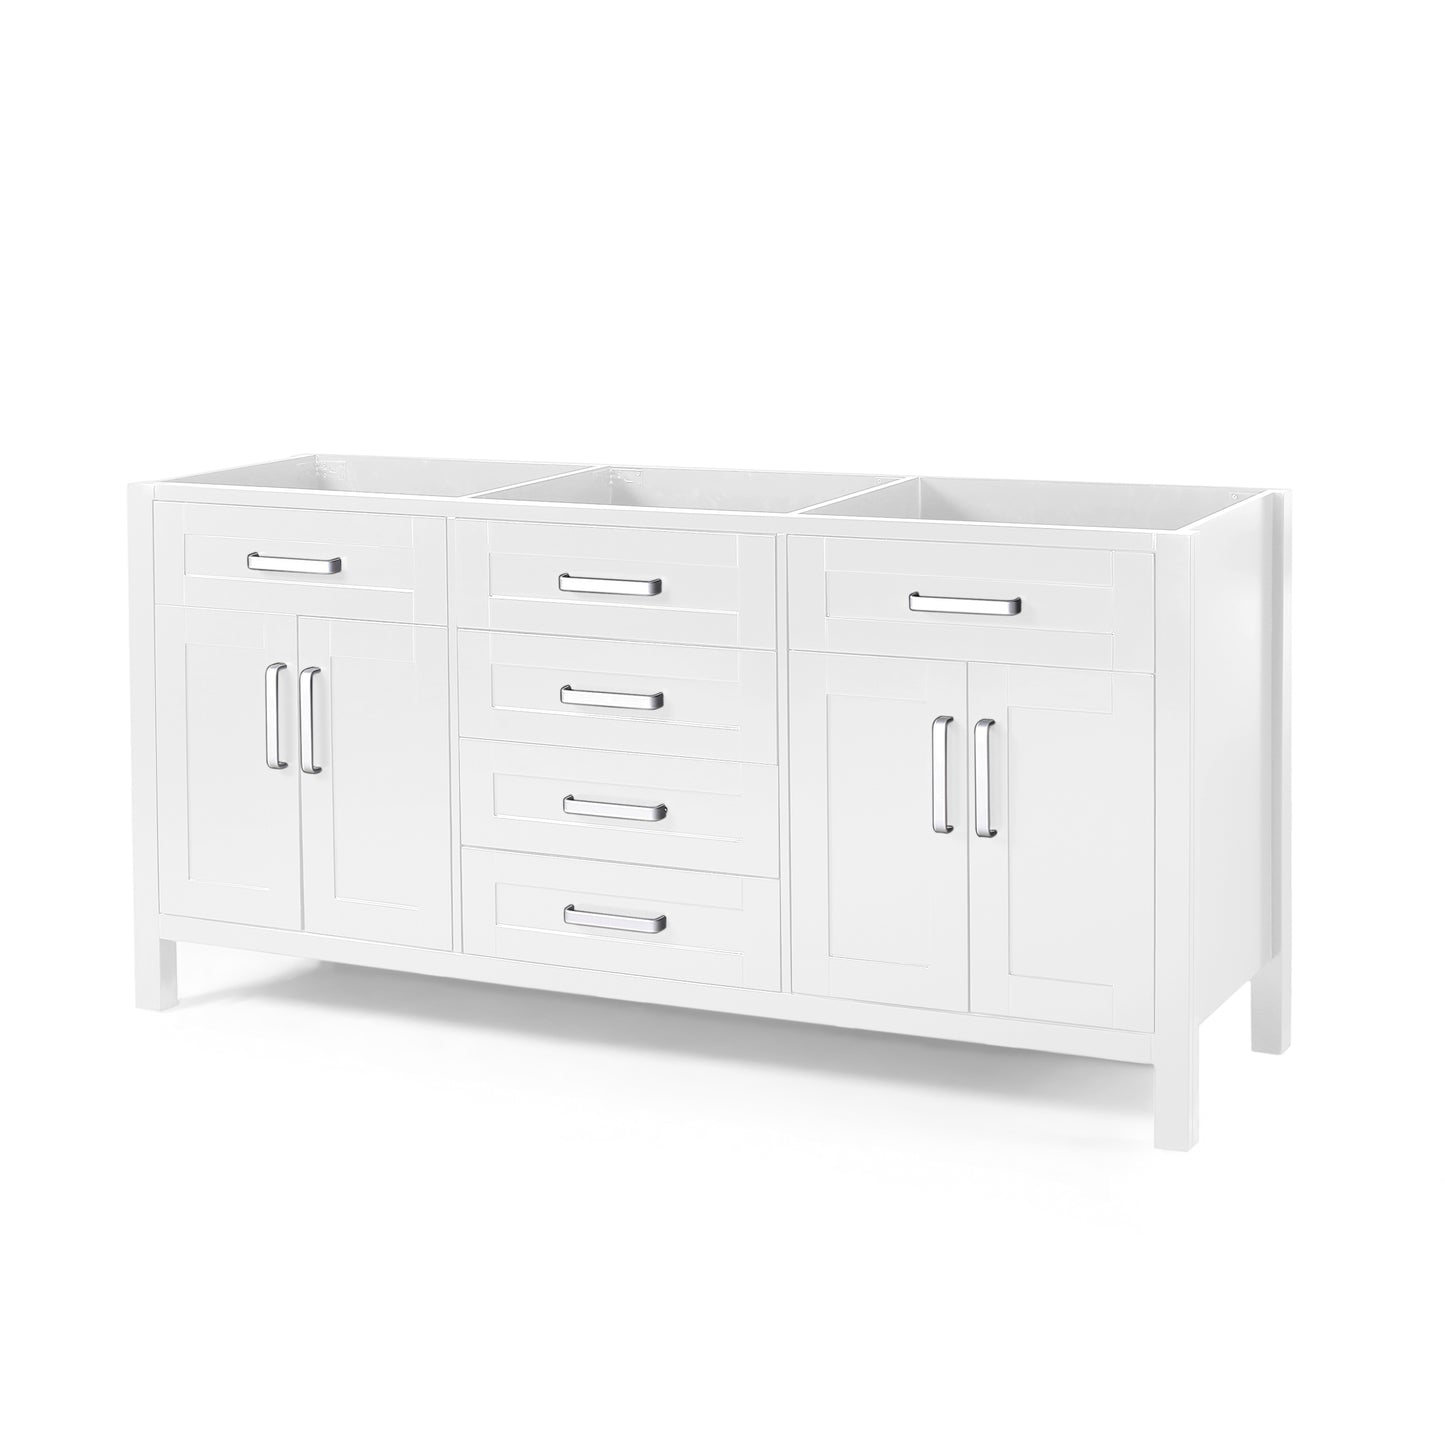 Greeley Contemporary 72" Wood Bathroom Vanity (Counter Top Not Included)